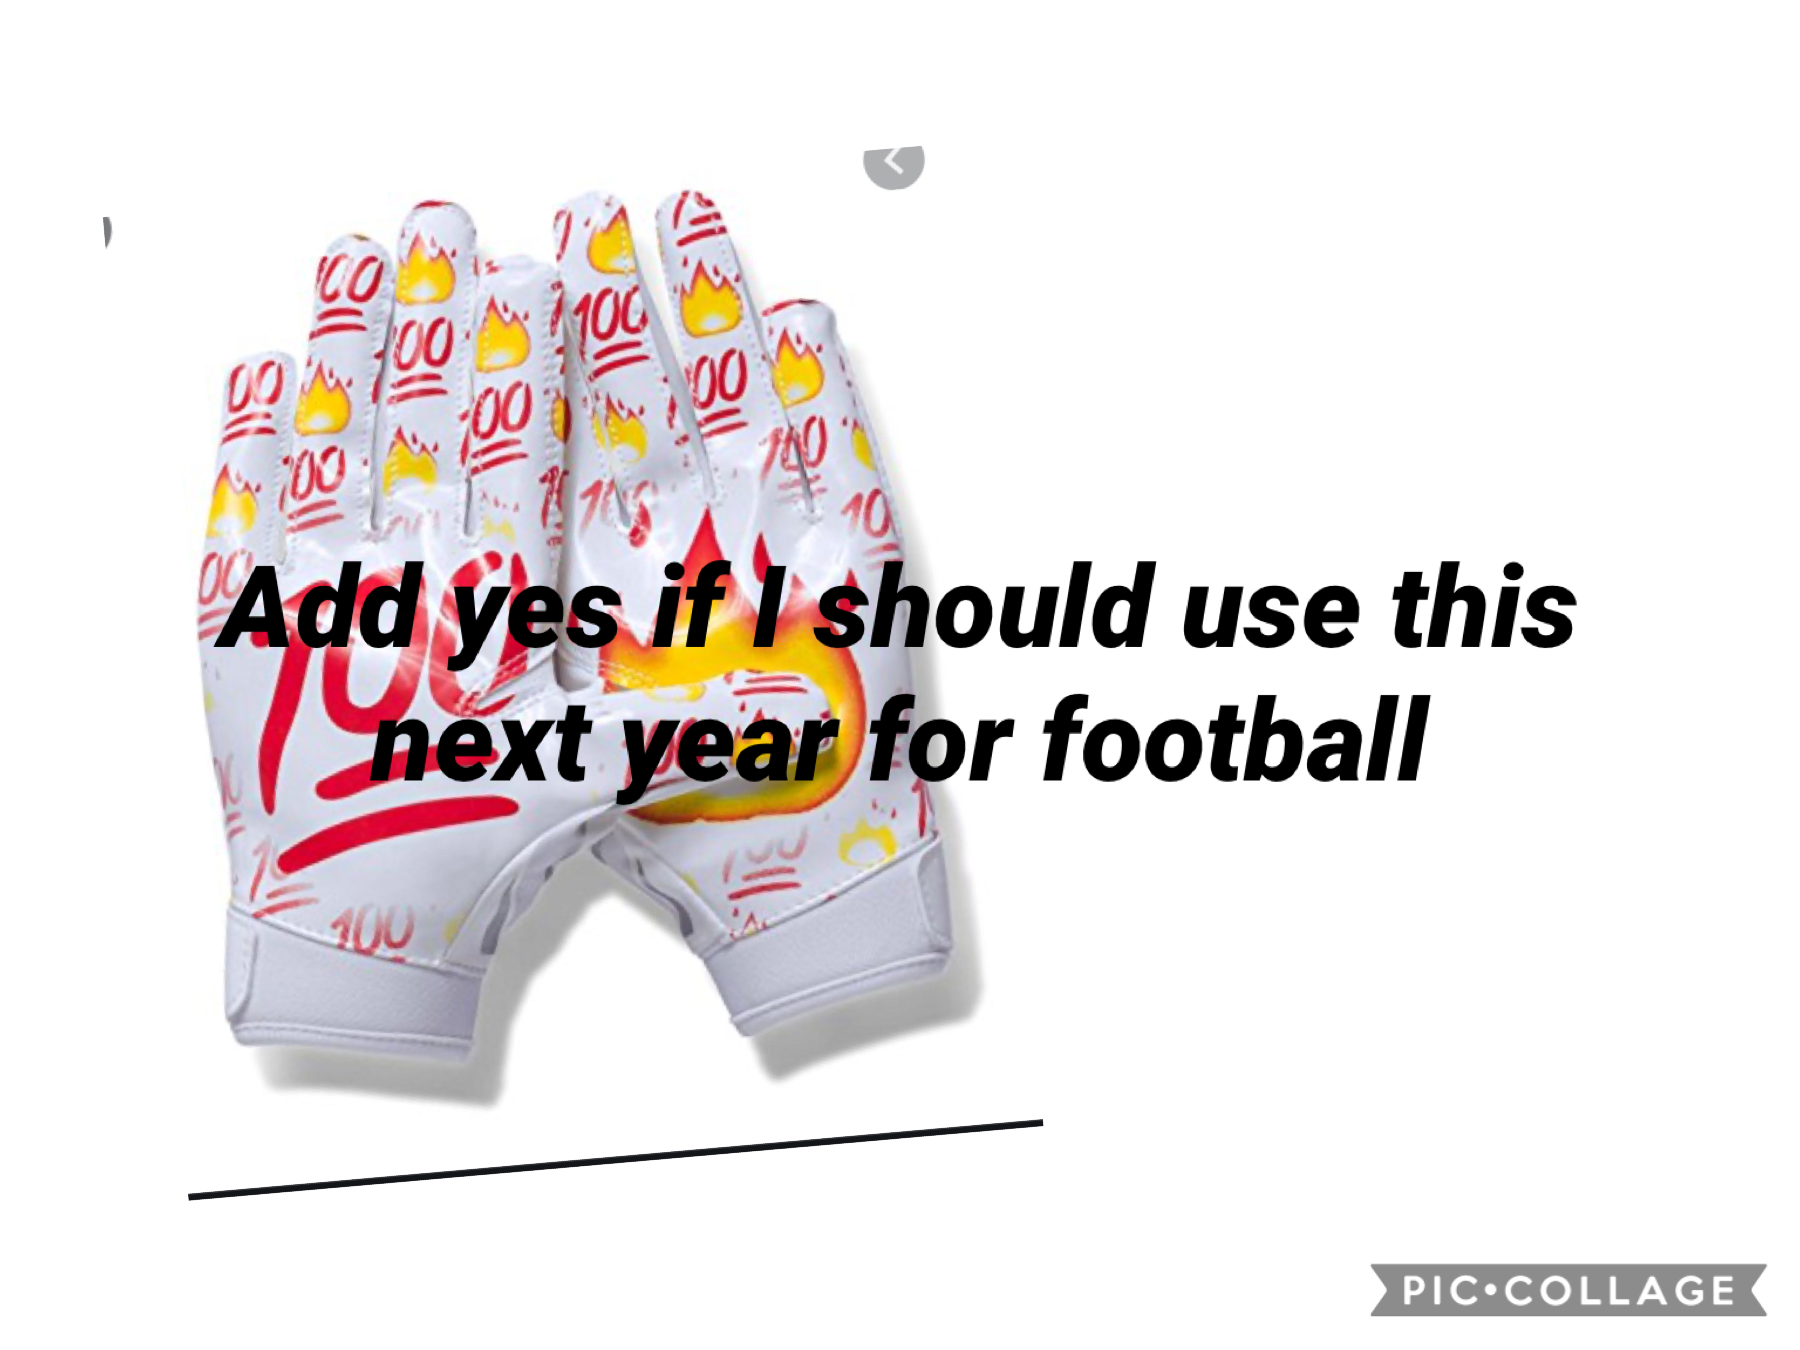 Playing football next year in hs put yes if should use them next year 